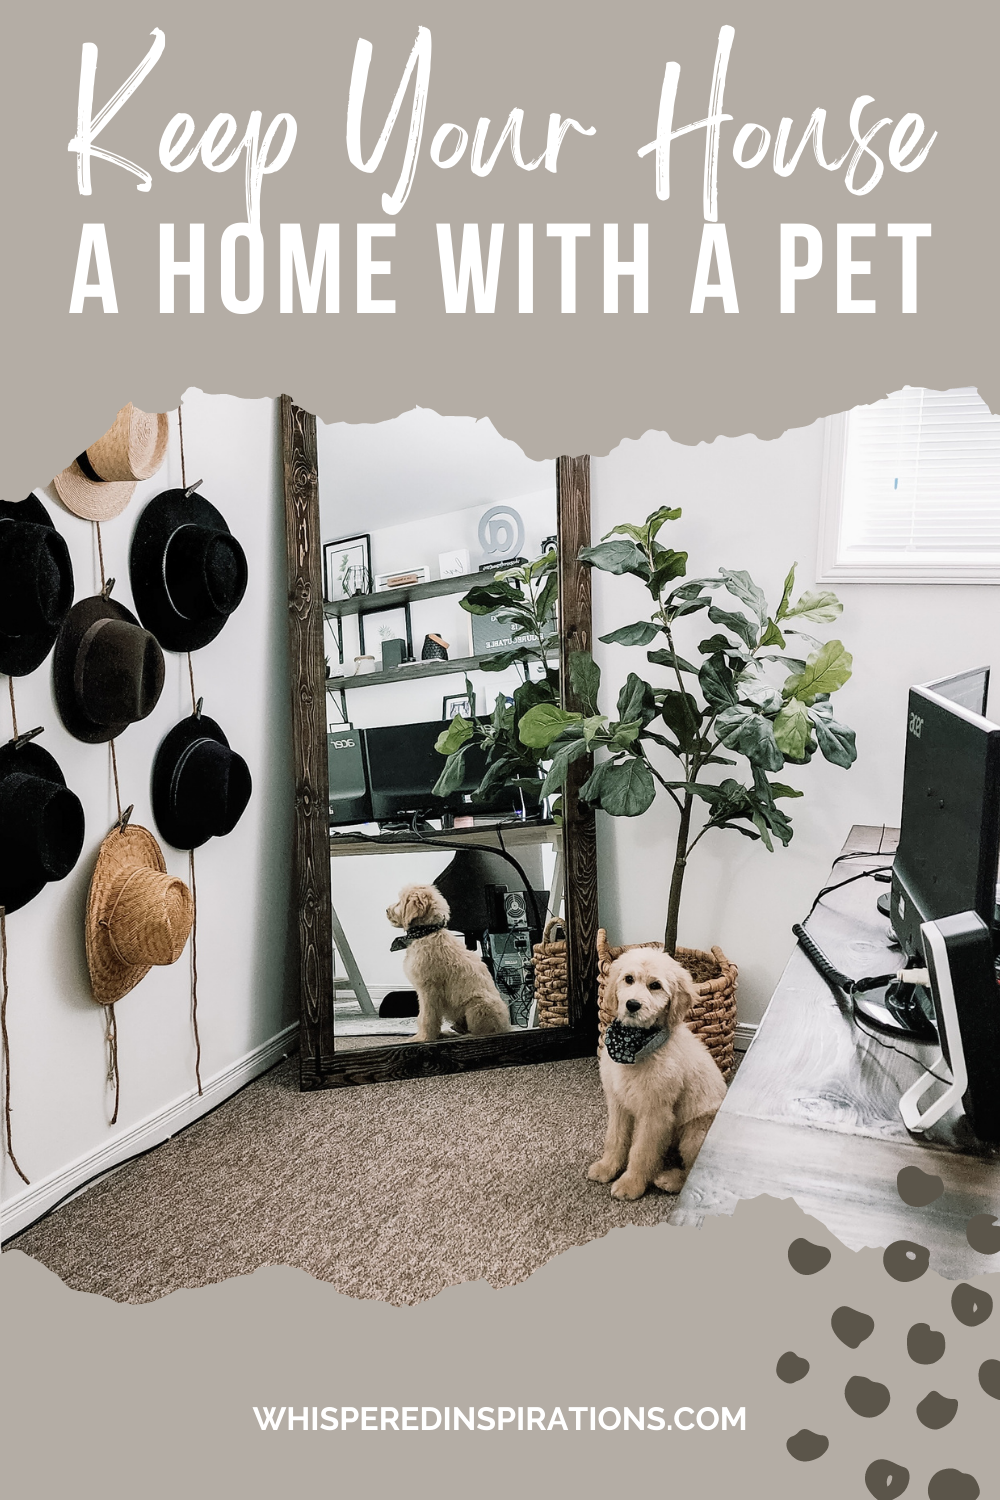 A blonde Goldendoodle sits on the carpet of an office. The office has farmhouse decor, a large full-length  This article covers how to keep your house a home with a pet.